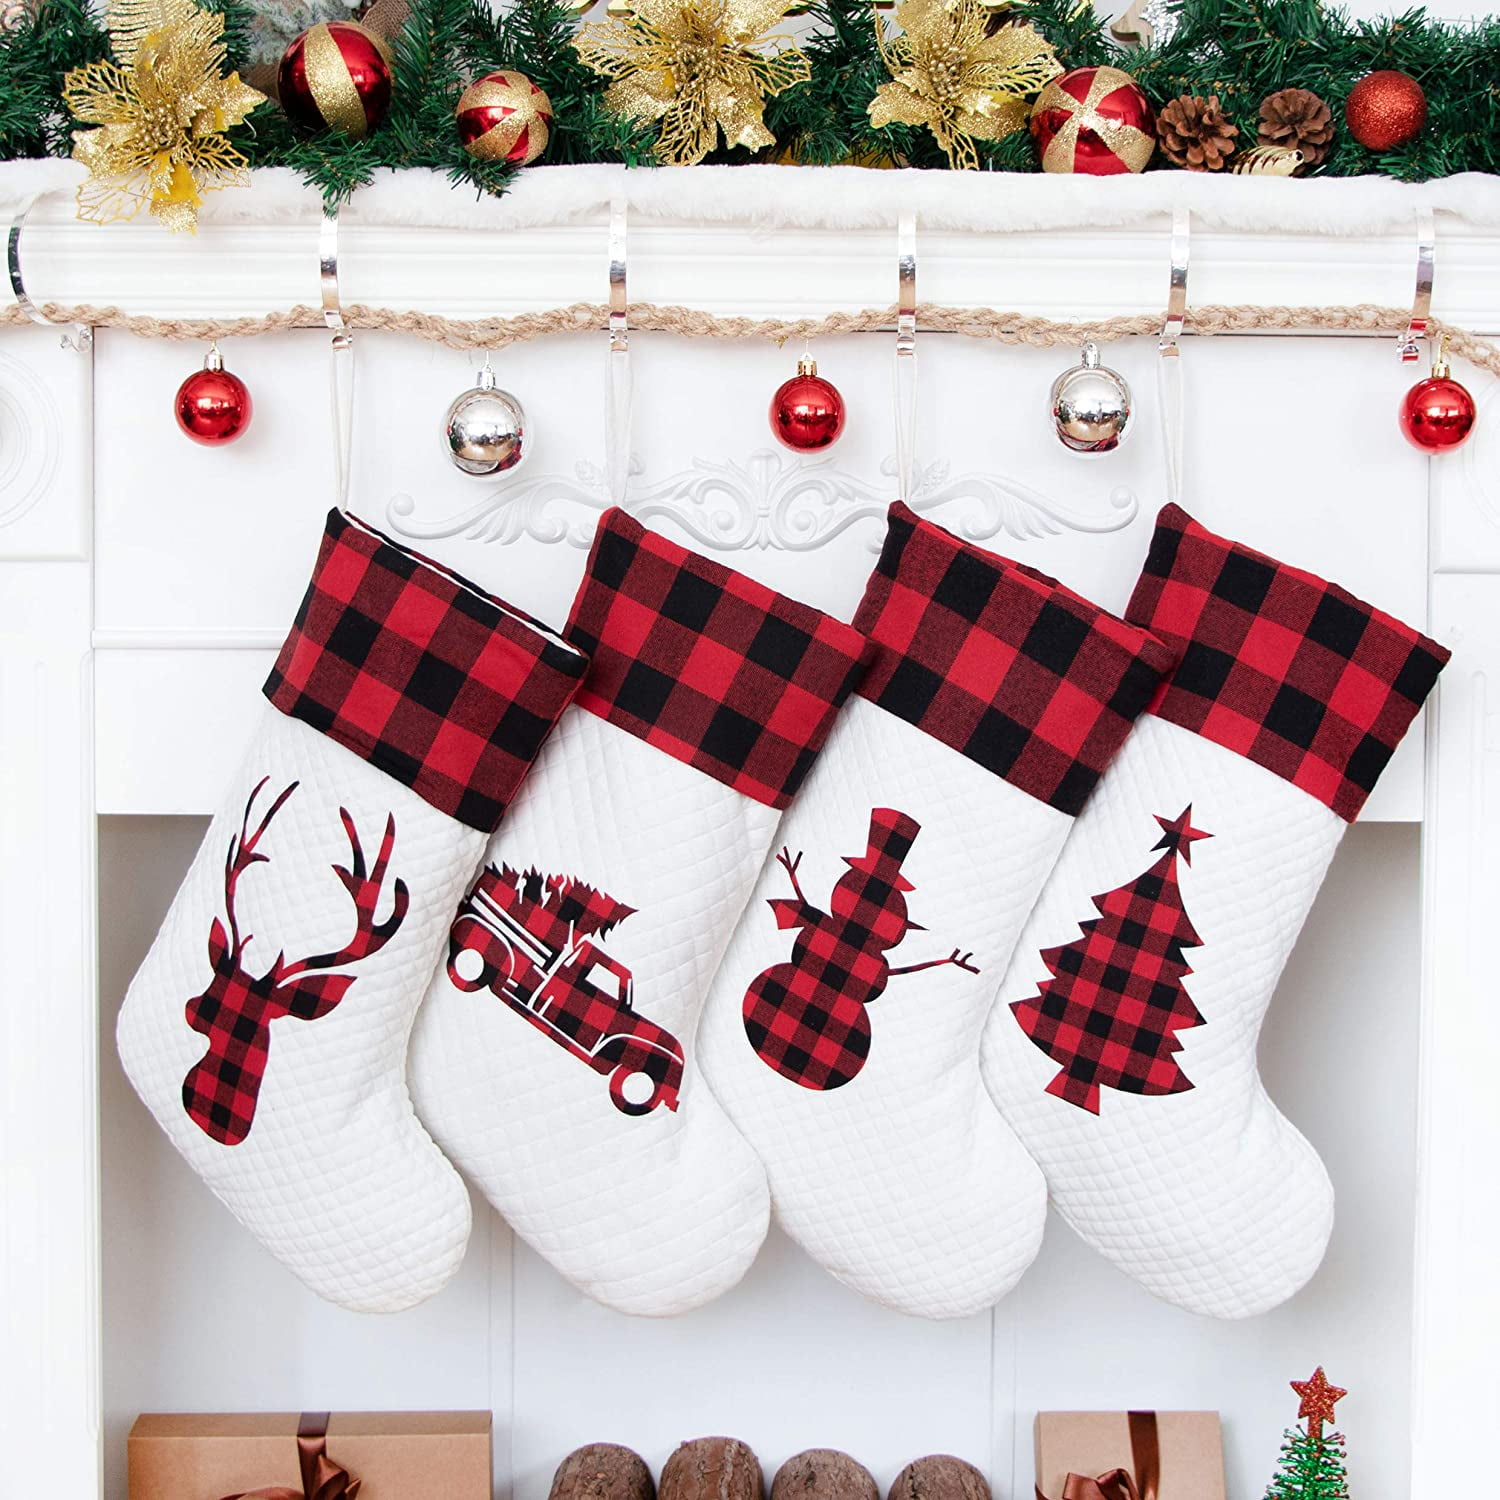  Christmas Stockings On Fireplace with Simple Decor